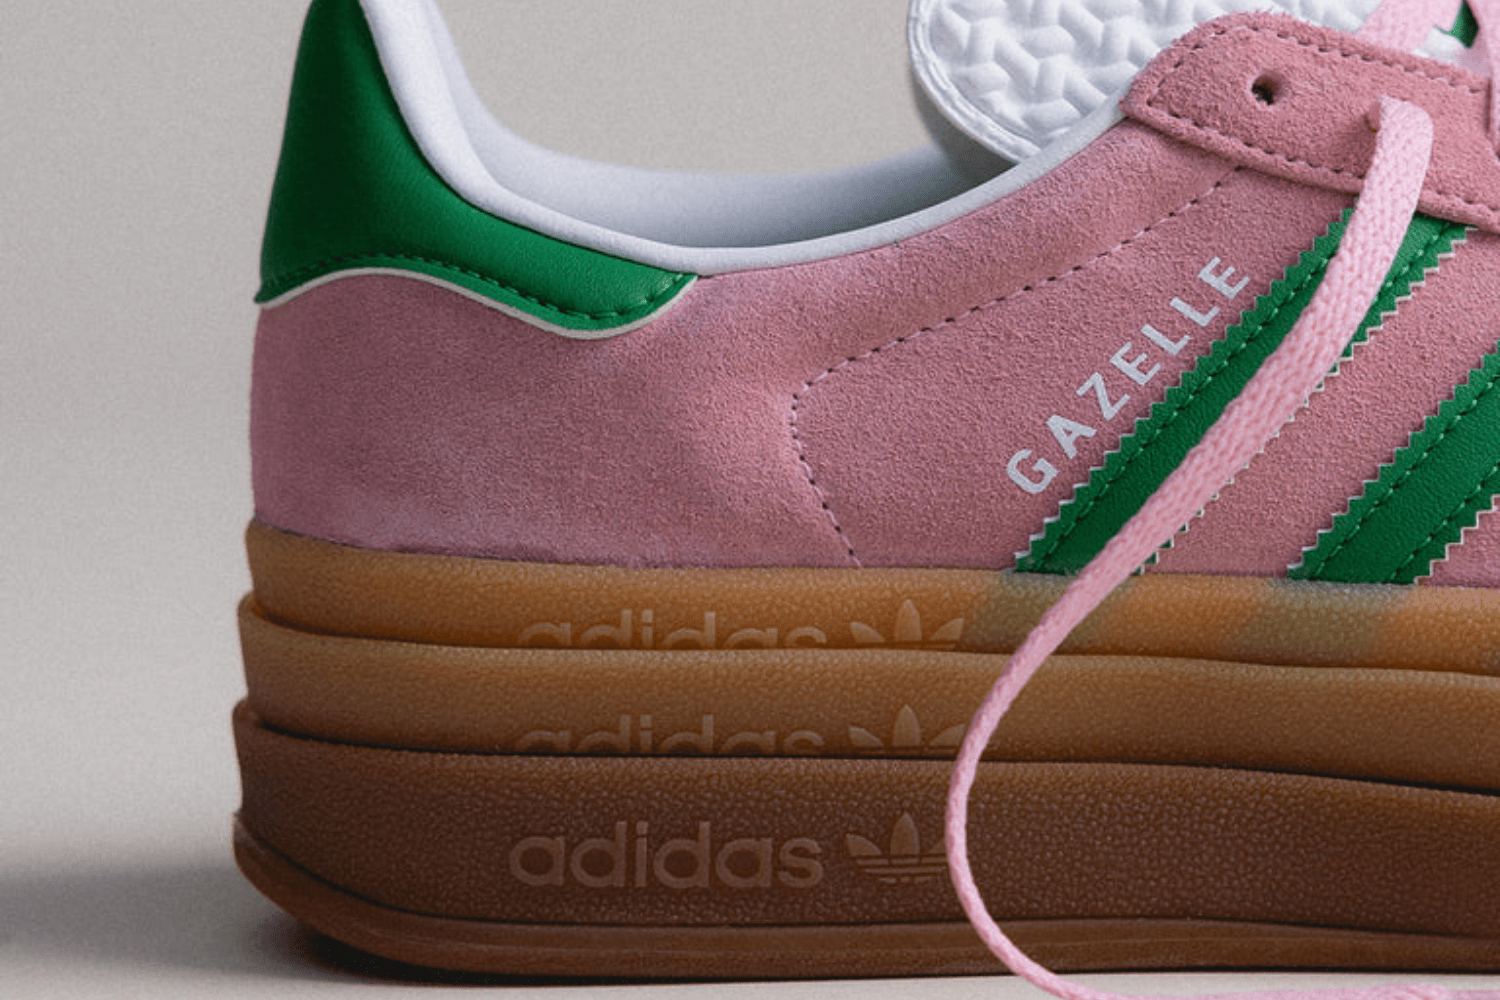 Popular chunky adidas sneakers: which style will you choose?